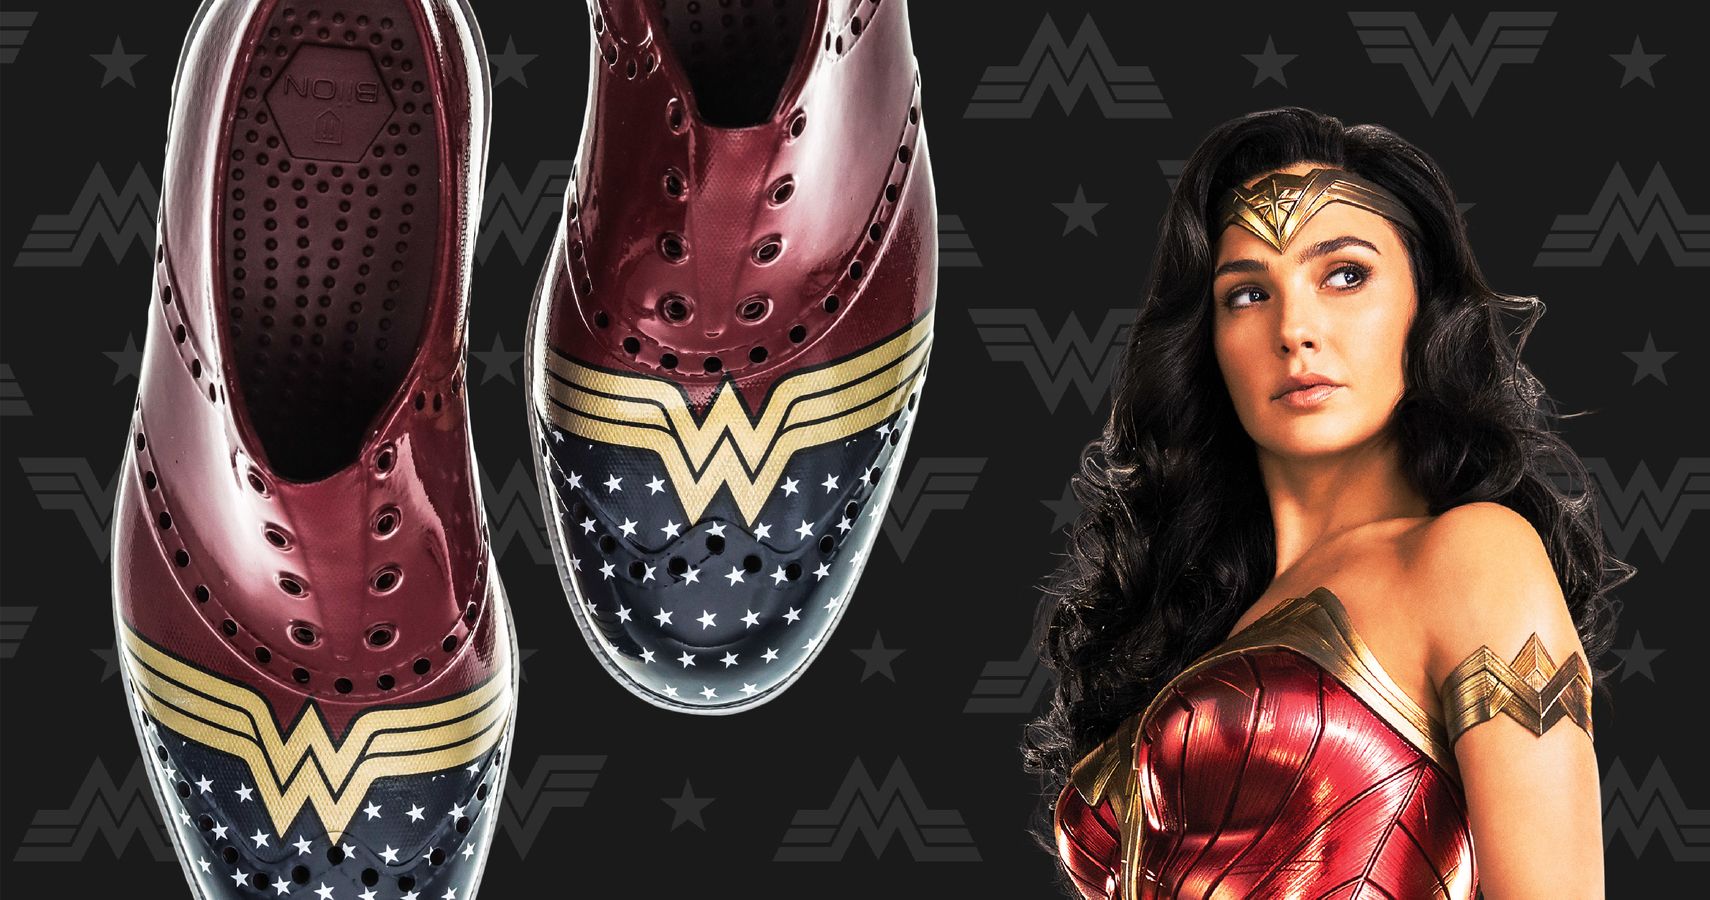 Get The Official Wonder Woman Shoes In Time For WW84